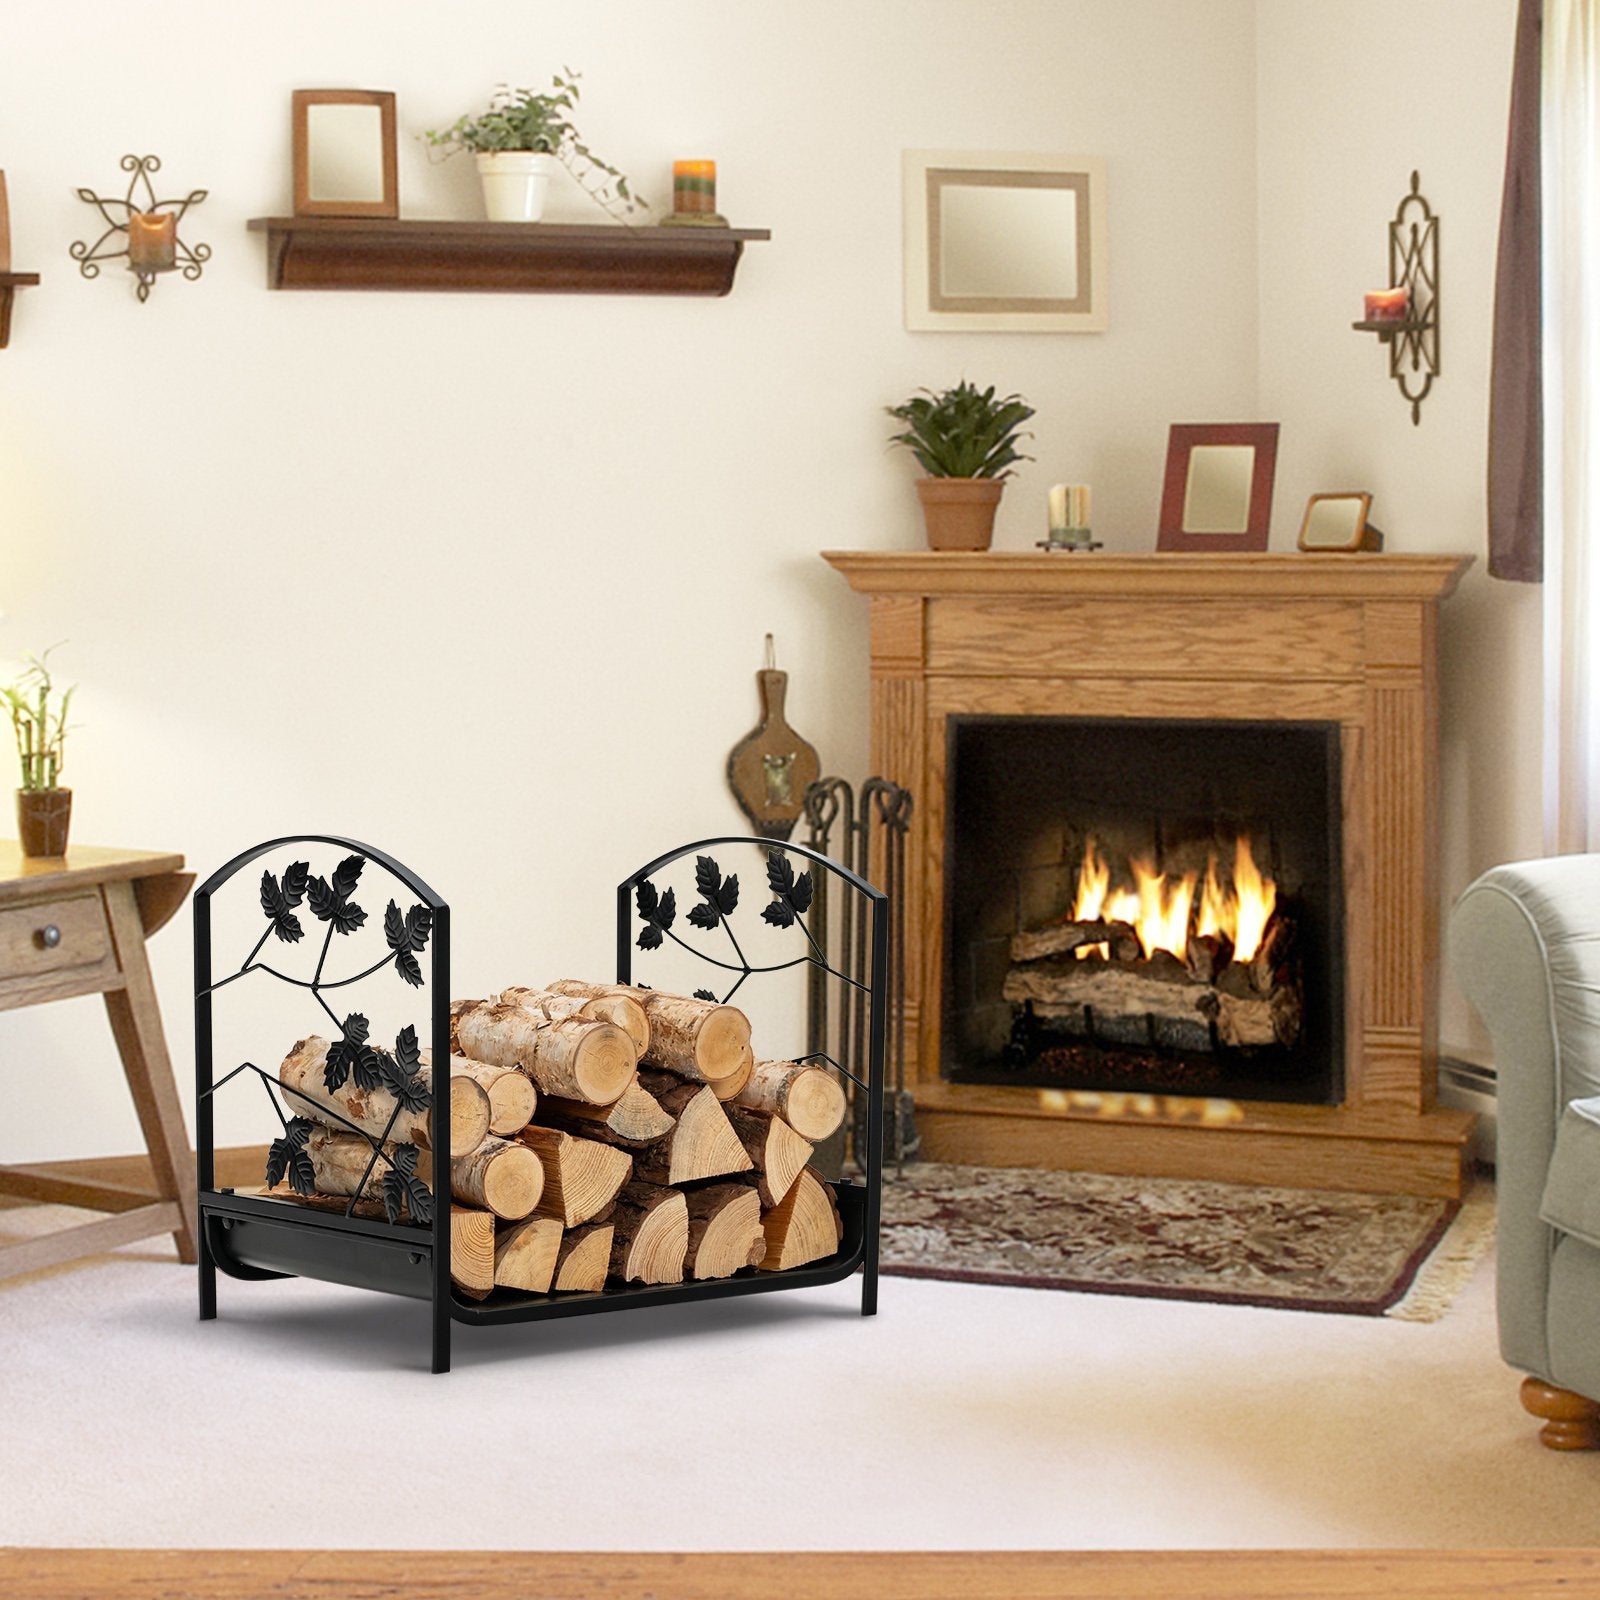 19 Inch Heavy-Duty Firewood Rack with 110 lbs Load Capacity, Black Log Storage   at Gallery Canada